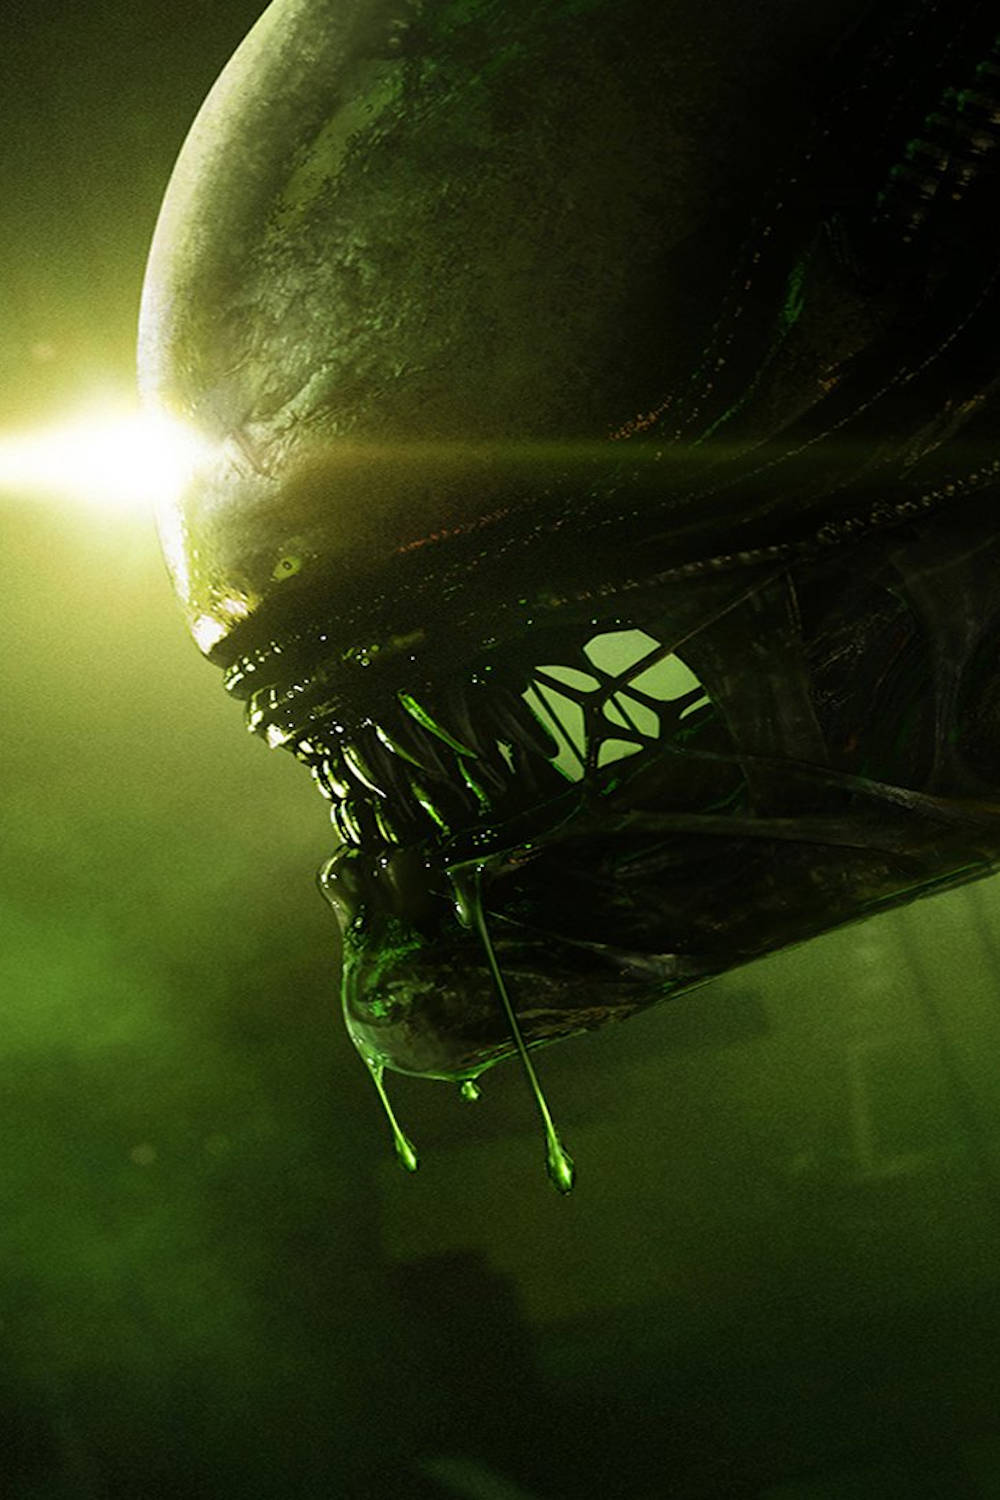 Aliens: Dark Descent and Nvidia RTX Video Cards - How to Get the Best Possible Gaming Experience